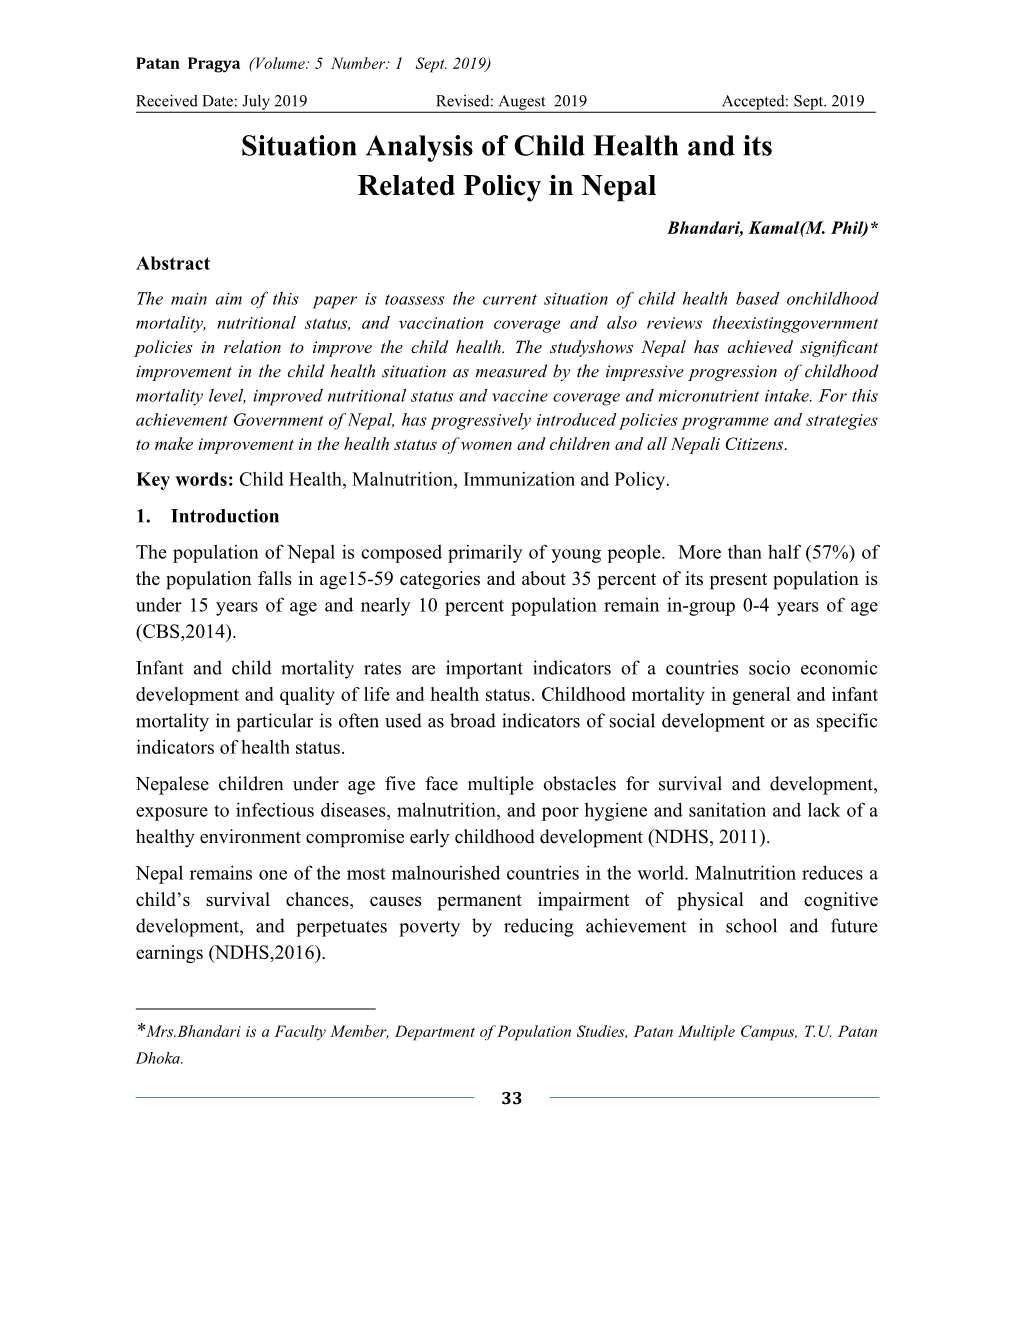 Situation Analysis of Child Health and Its Related Policy in Nepal